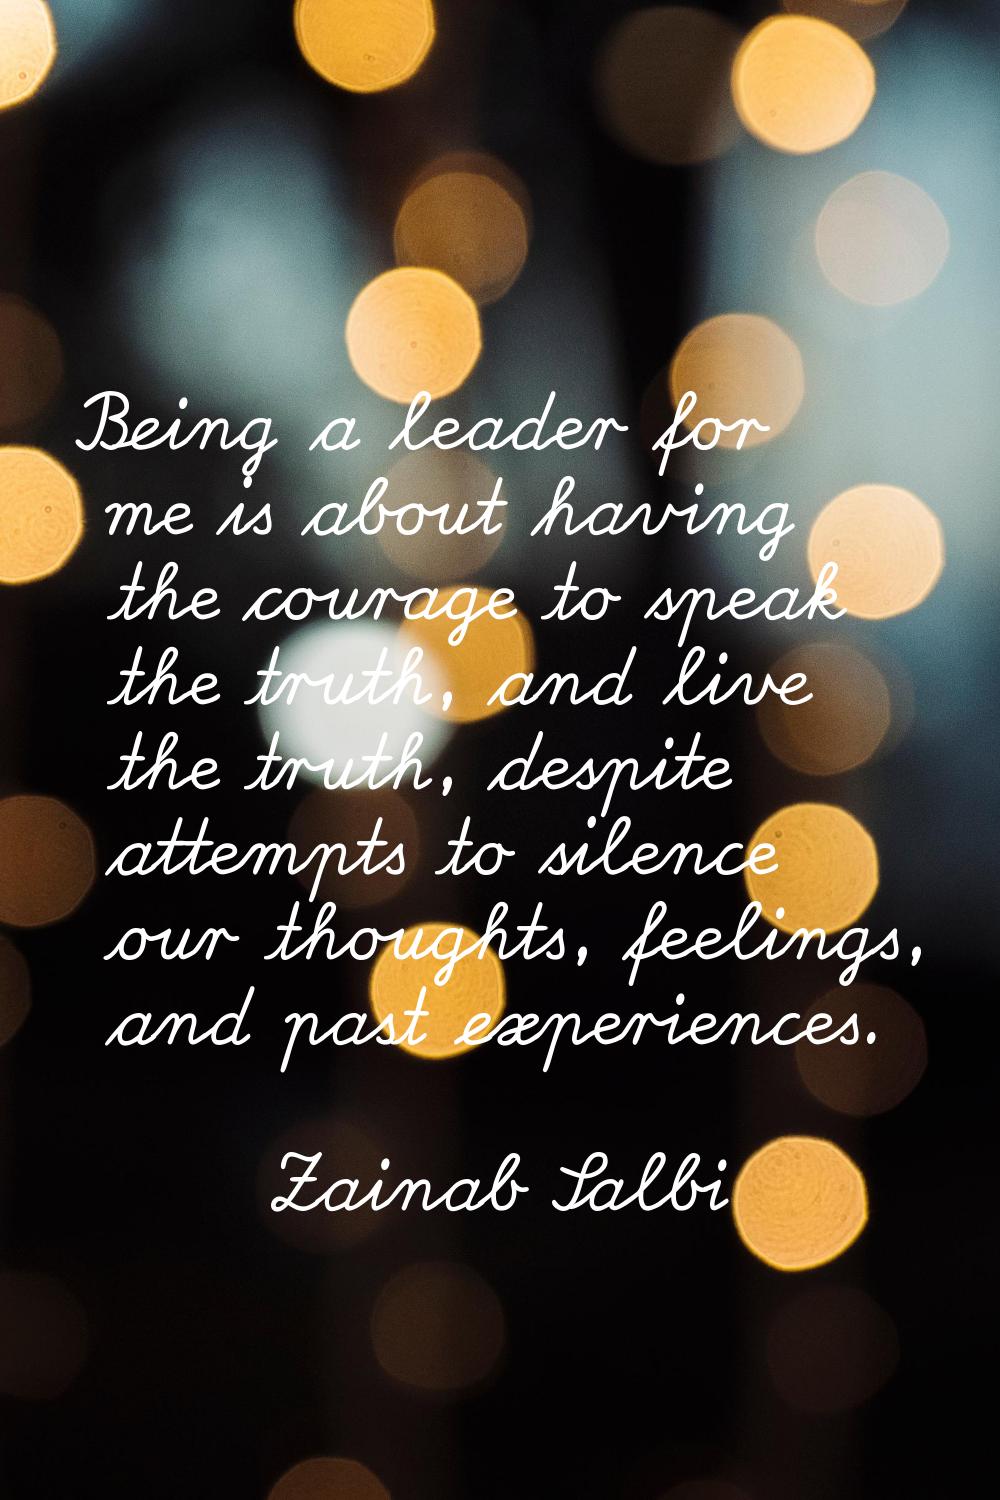 Being a leader for me is about having the courage to speak the truth, and live the truth, despite a